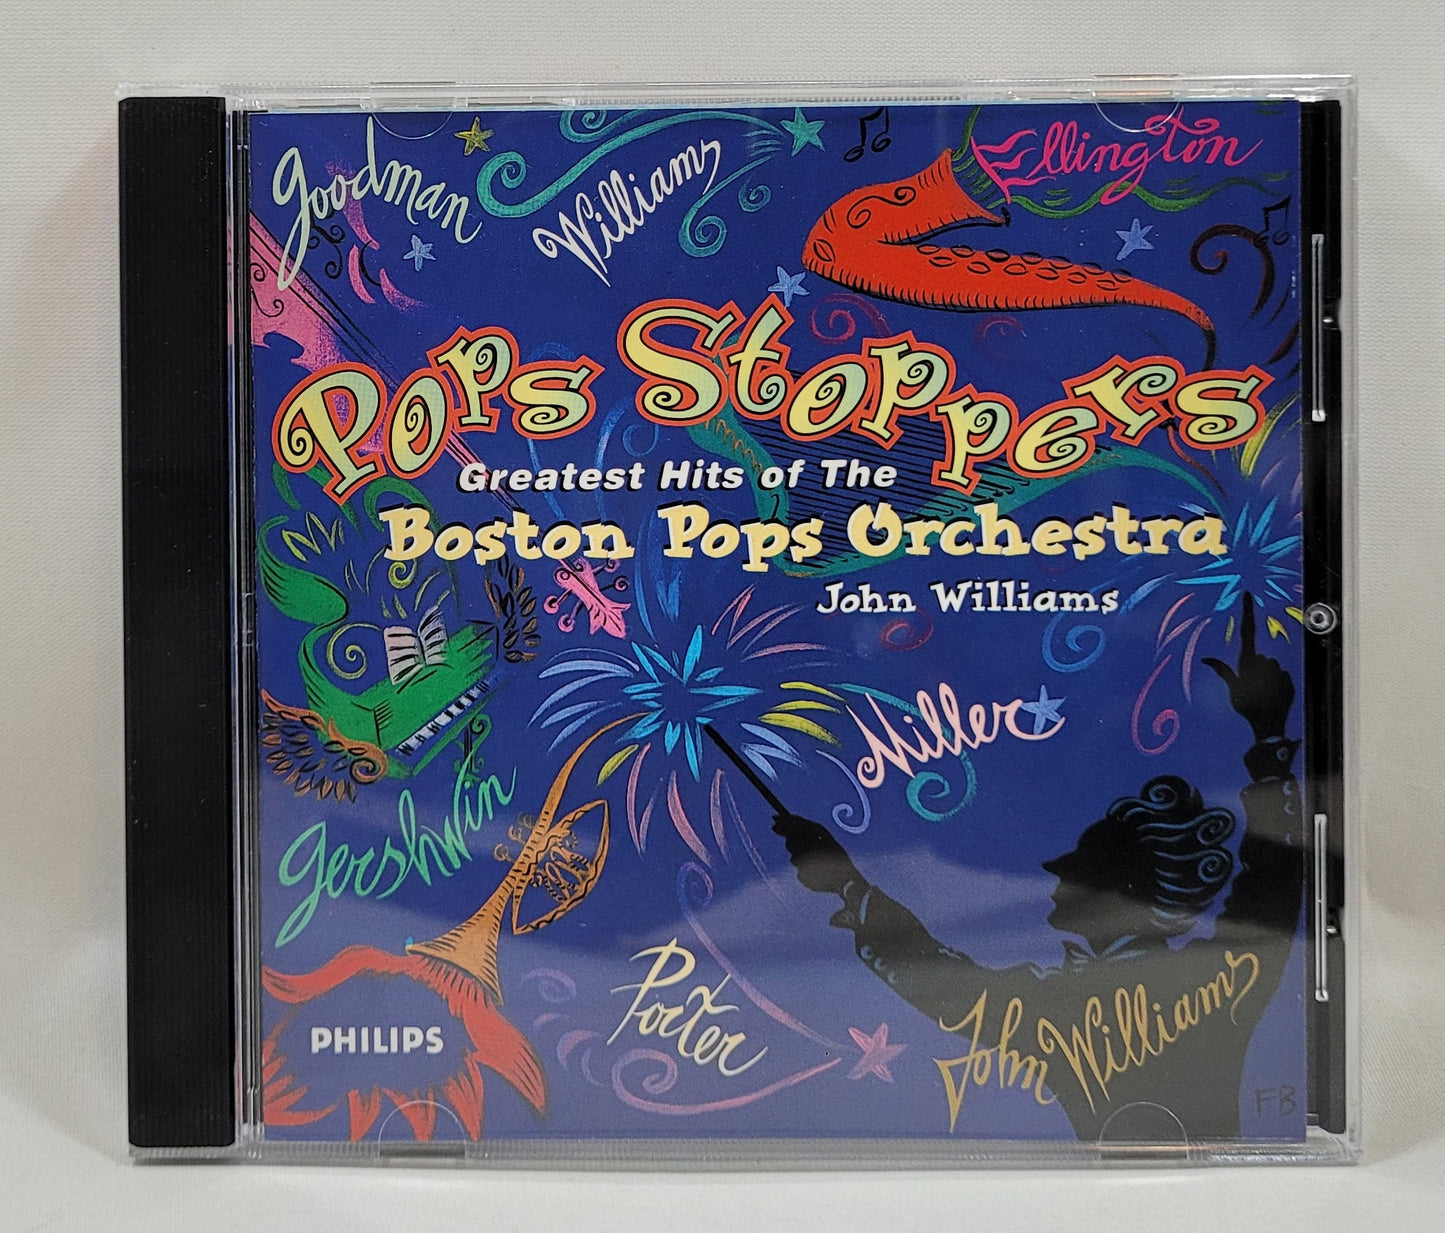 The Boston Pops Orchestra - Pops Stoppers: Greatest Hits of The Boston Pops Orchestra [1995 Club Edition] [Used CD]